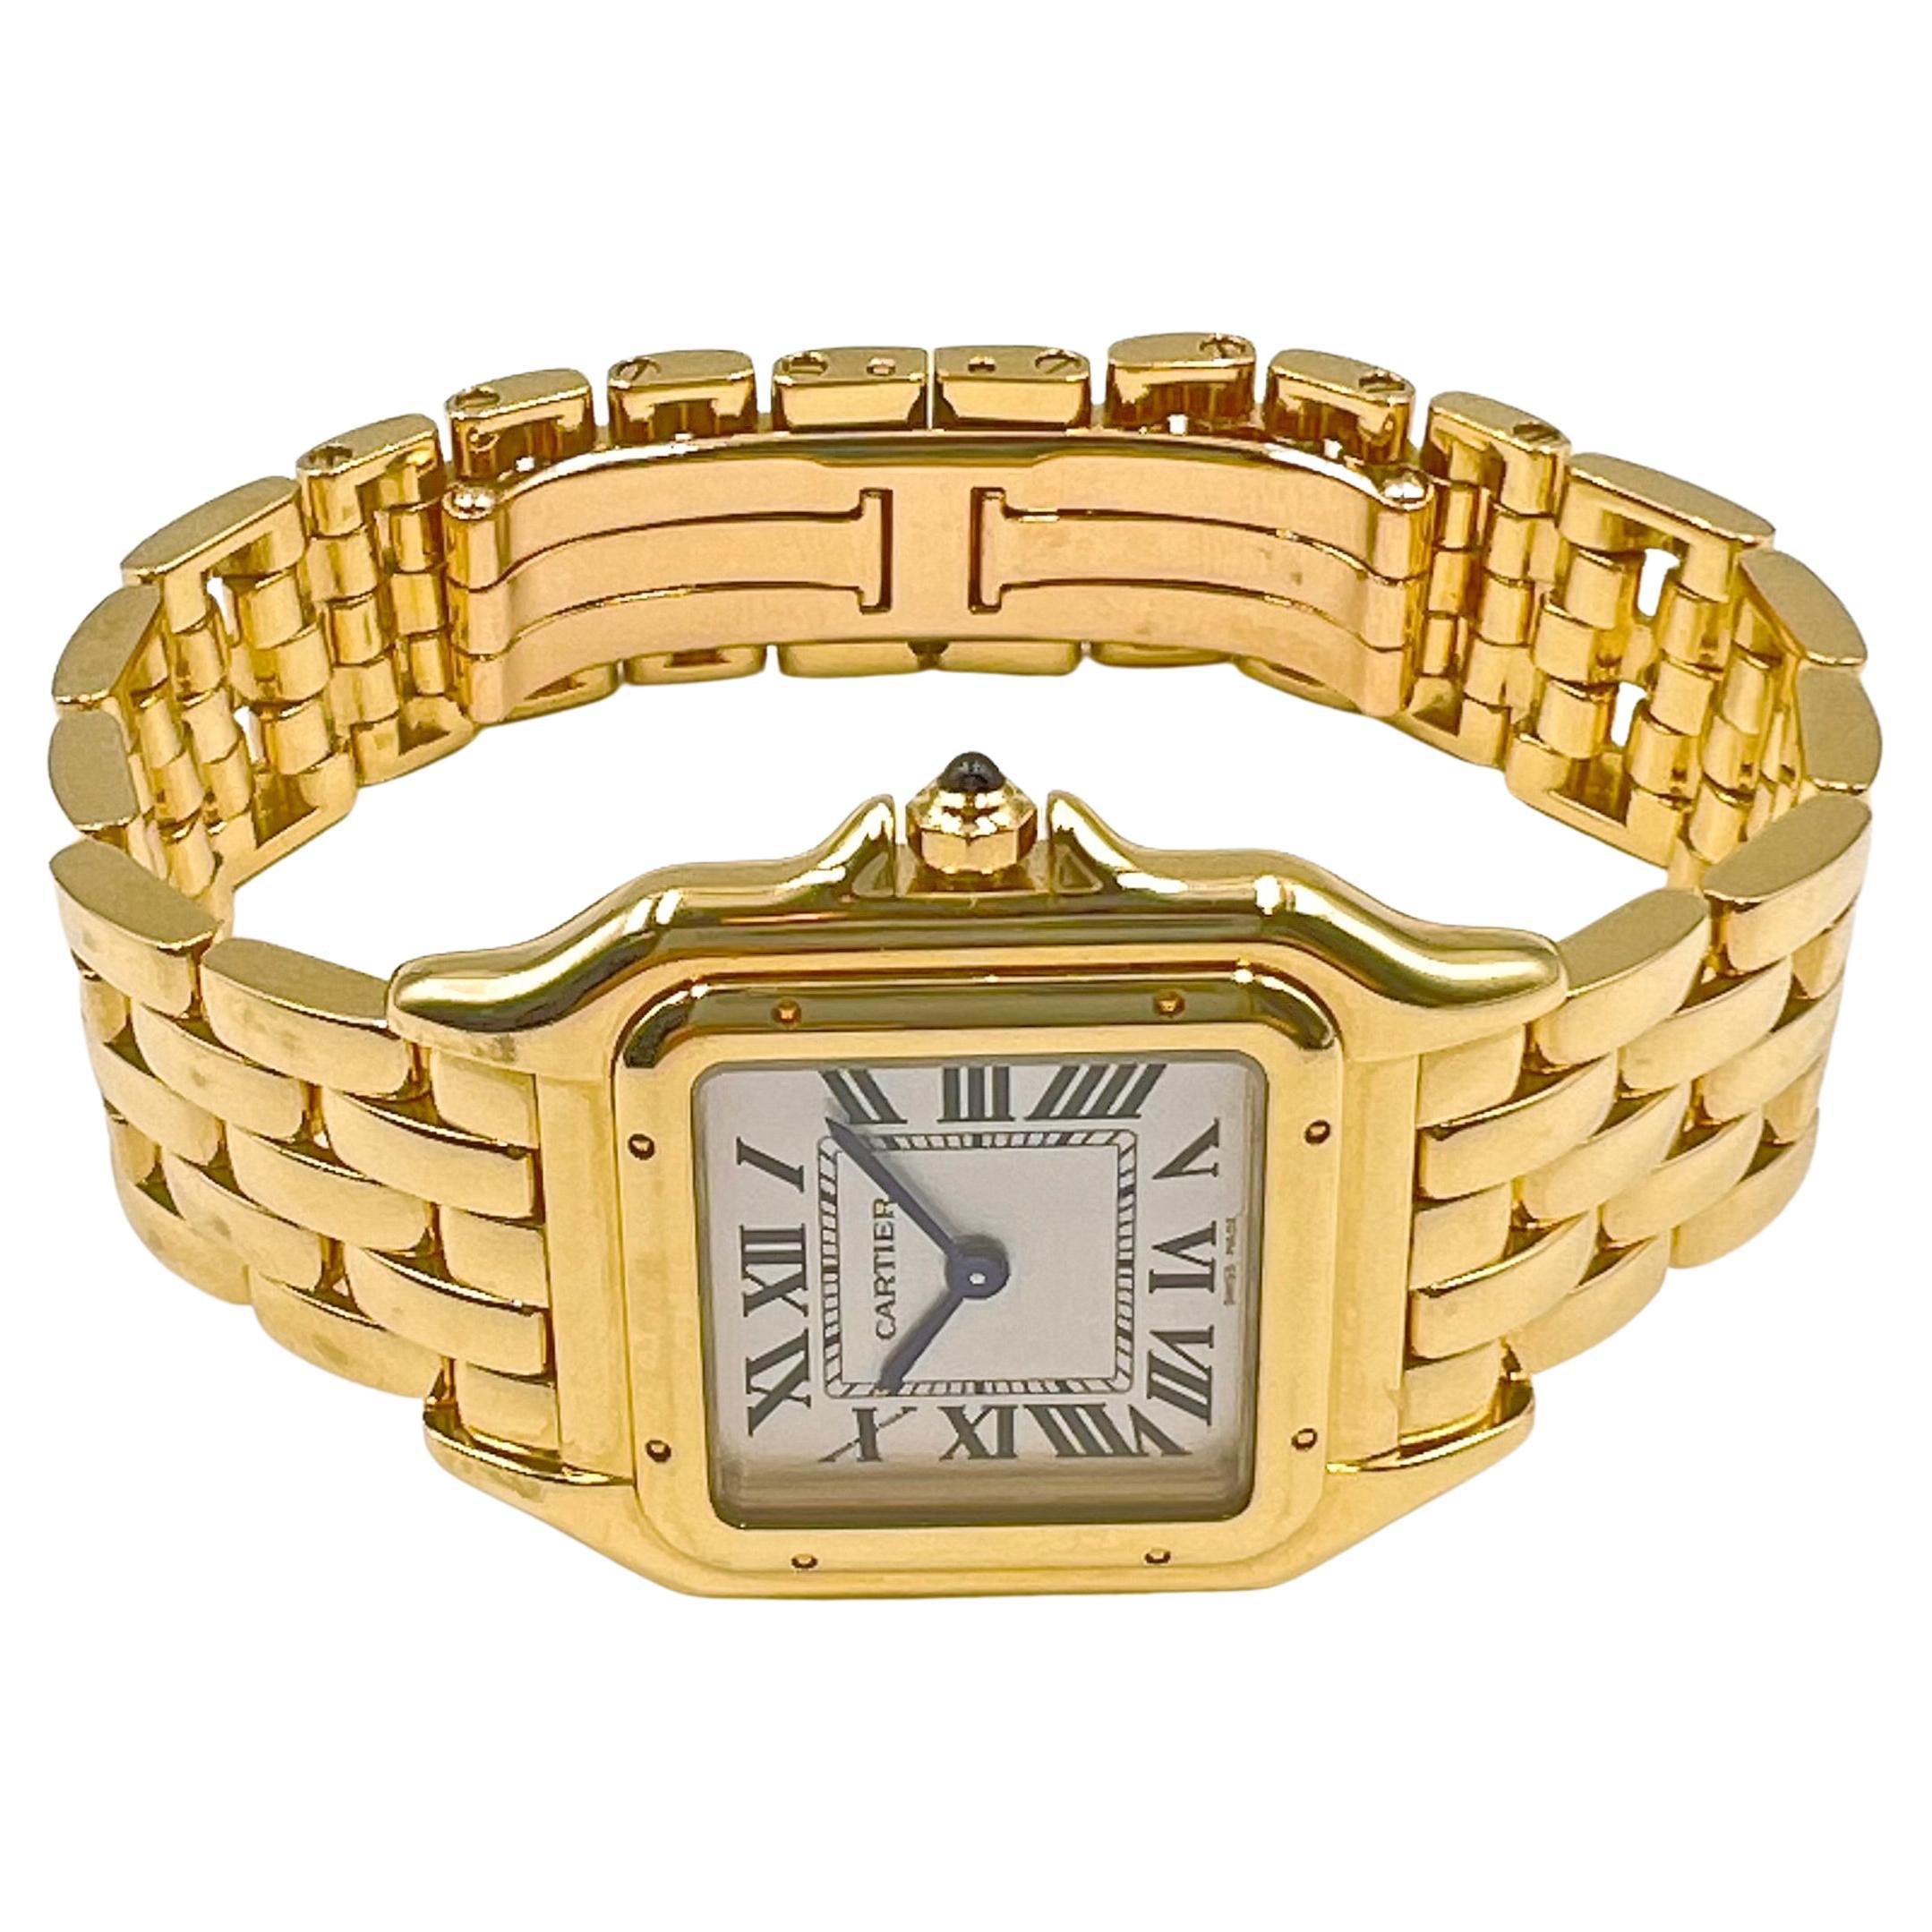 Pre-owned ​Panthere de Cartier medium-sized wristwatch (ref. WGPN0009), featuring a Swiss-made quartz movement; silvered dial with black Roman numerals & blued-steel, sword-shaped hands; and 37 x 27mm, 18k yellow gold case on an 18k yellow gold link